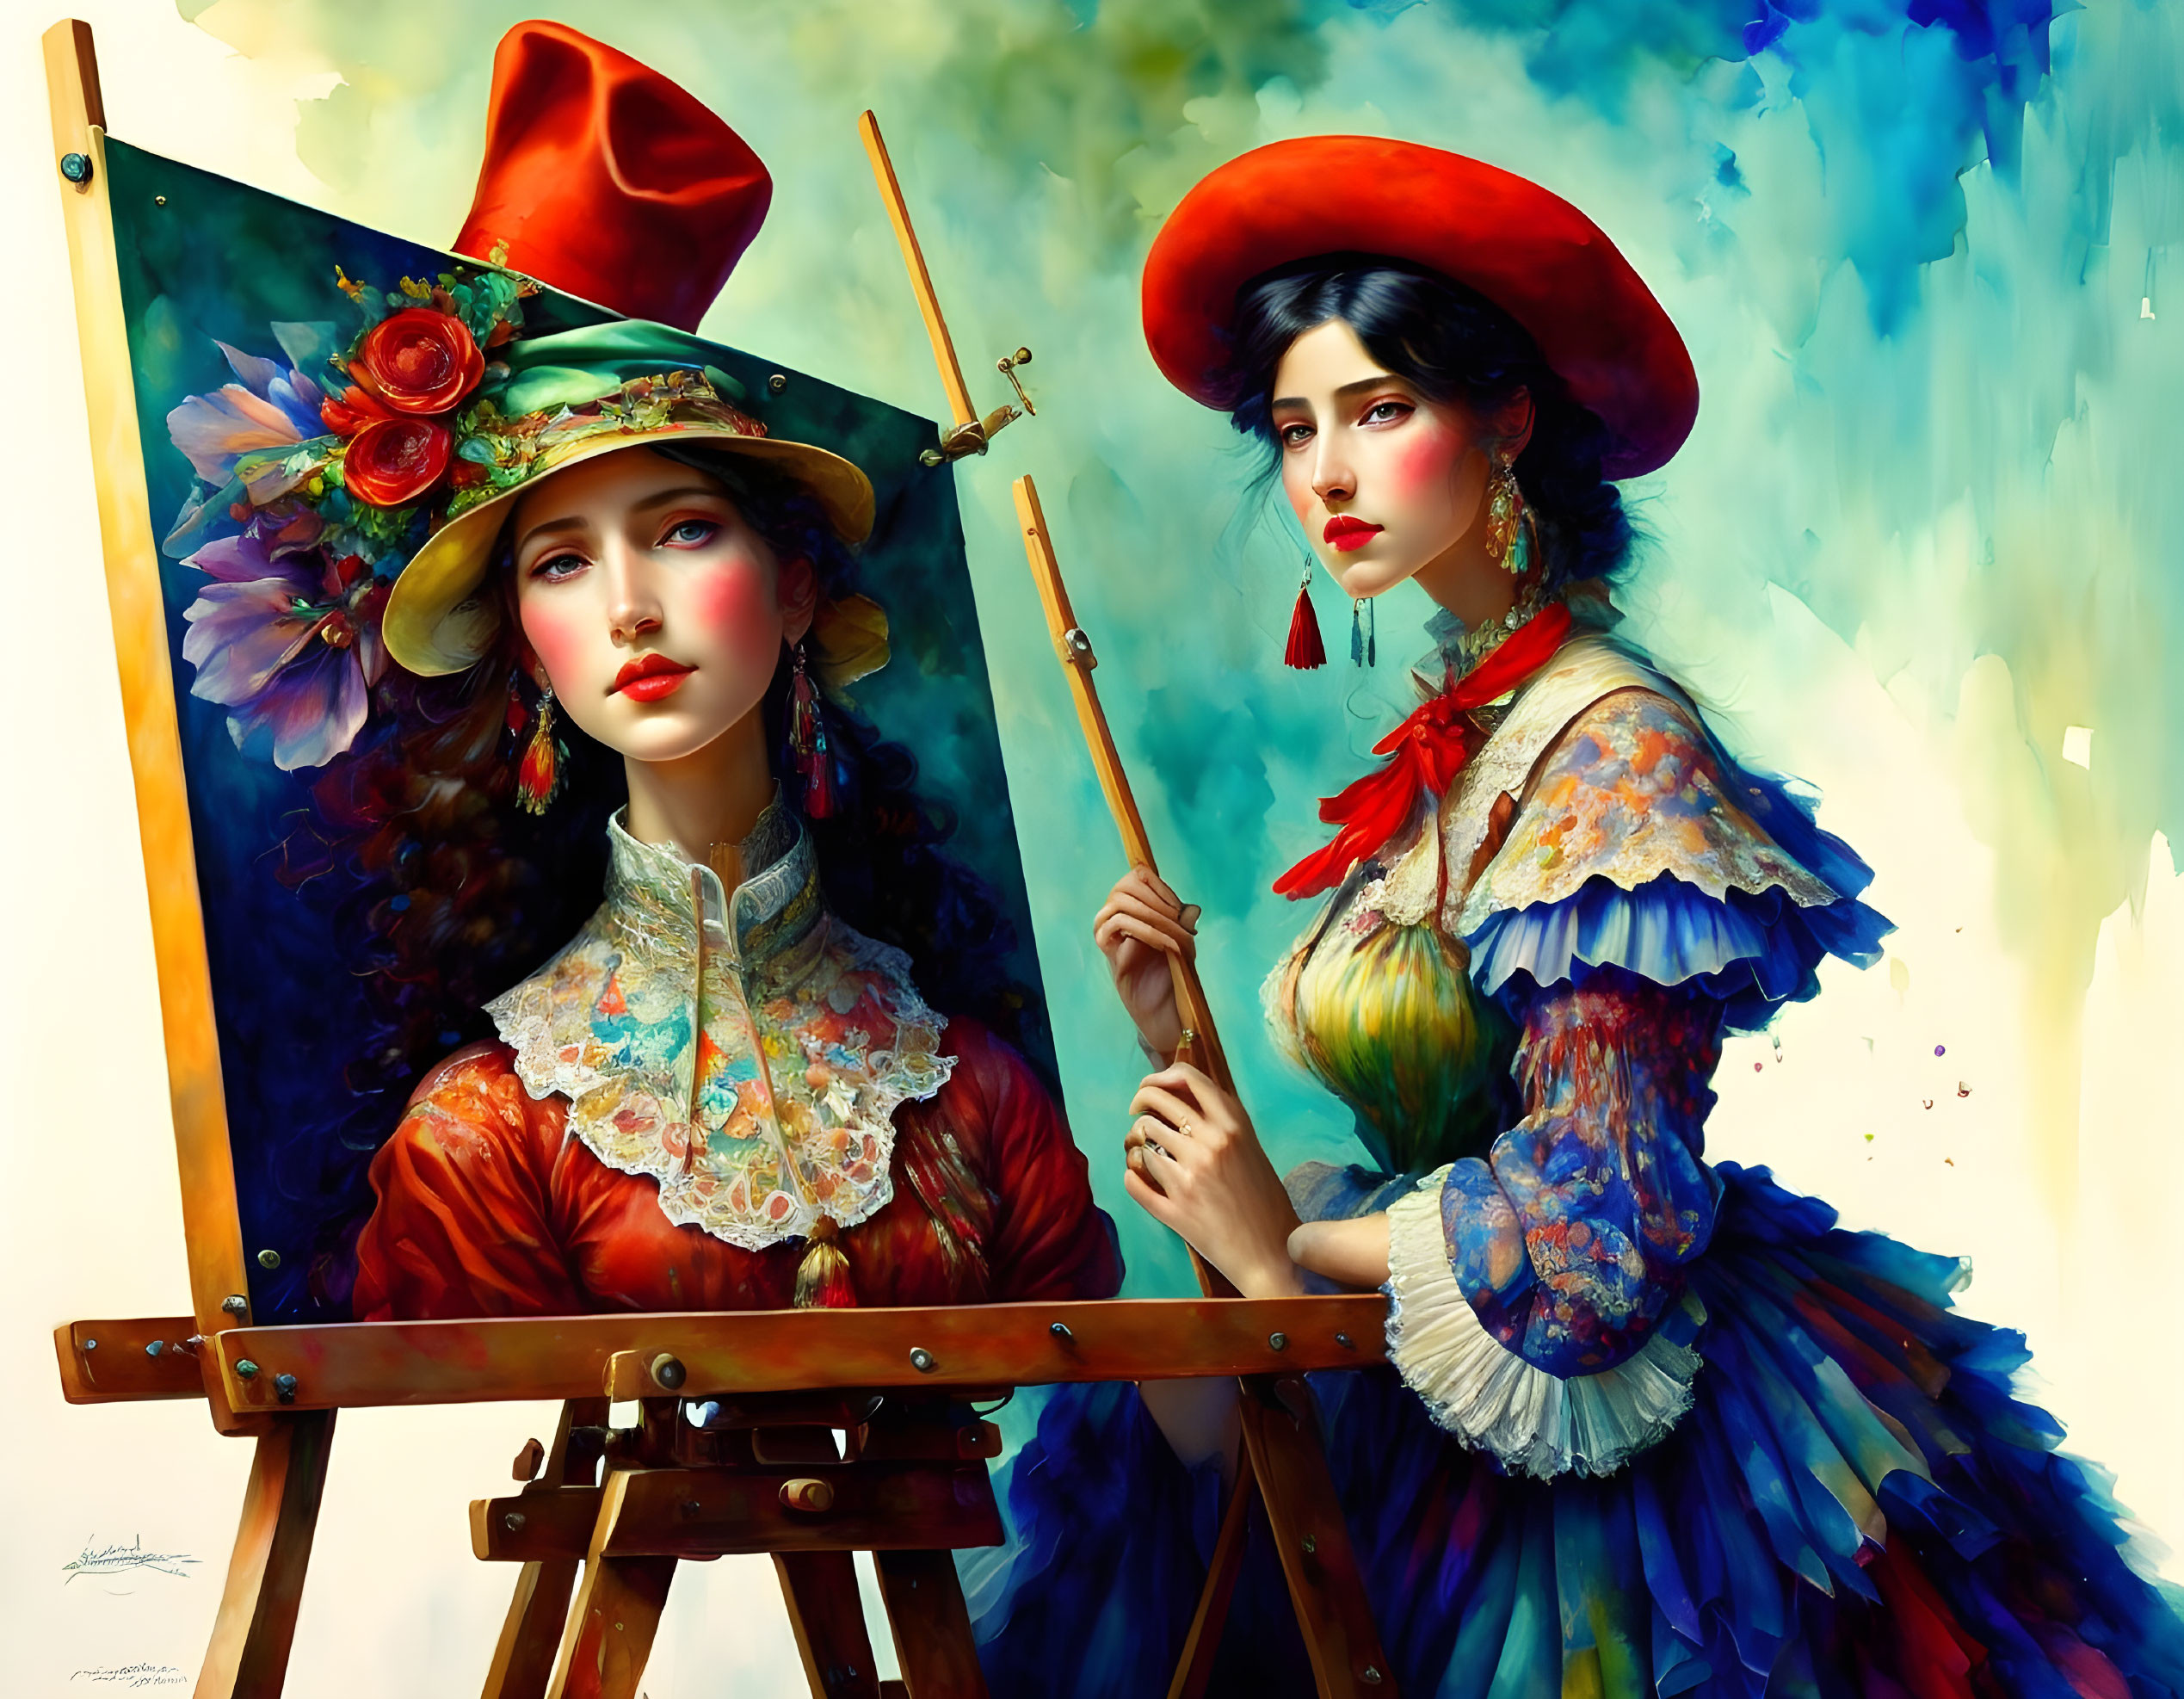 Vibrant painting of two women in vintage attire creating art